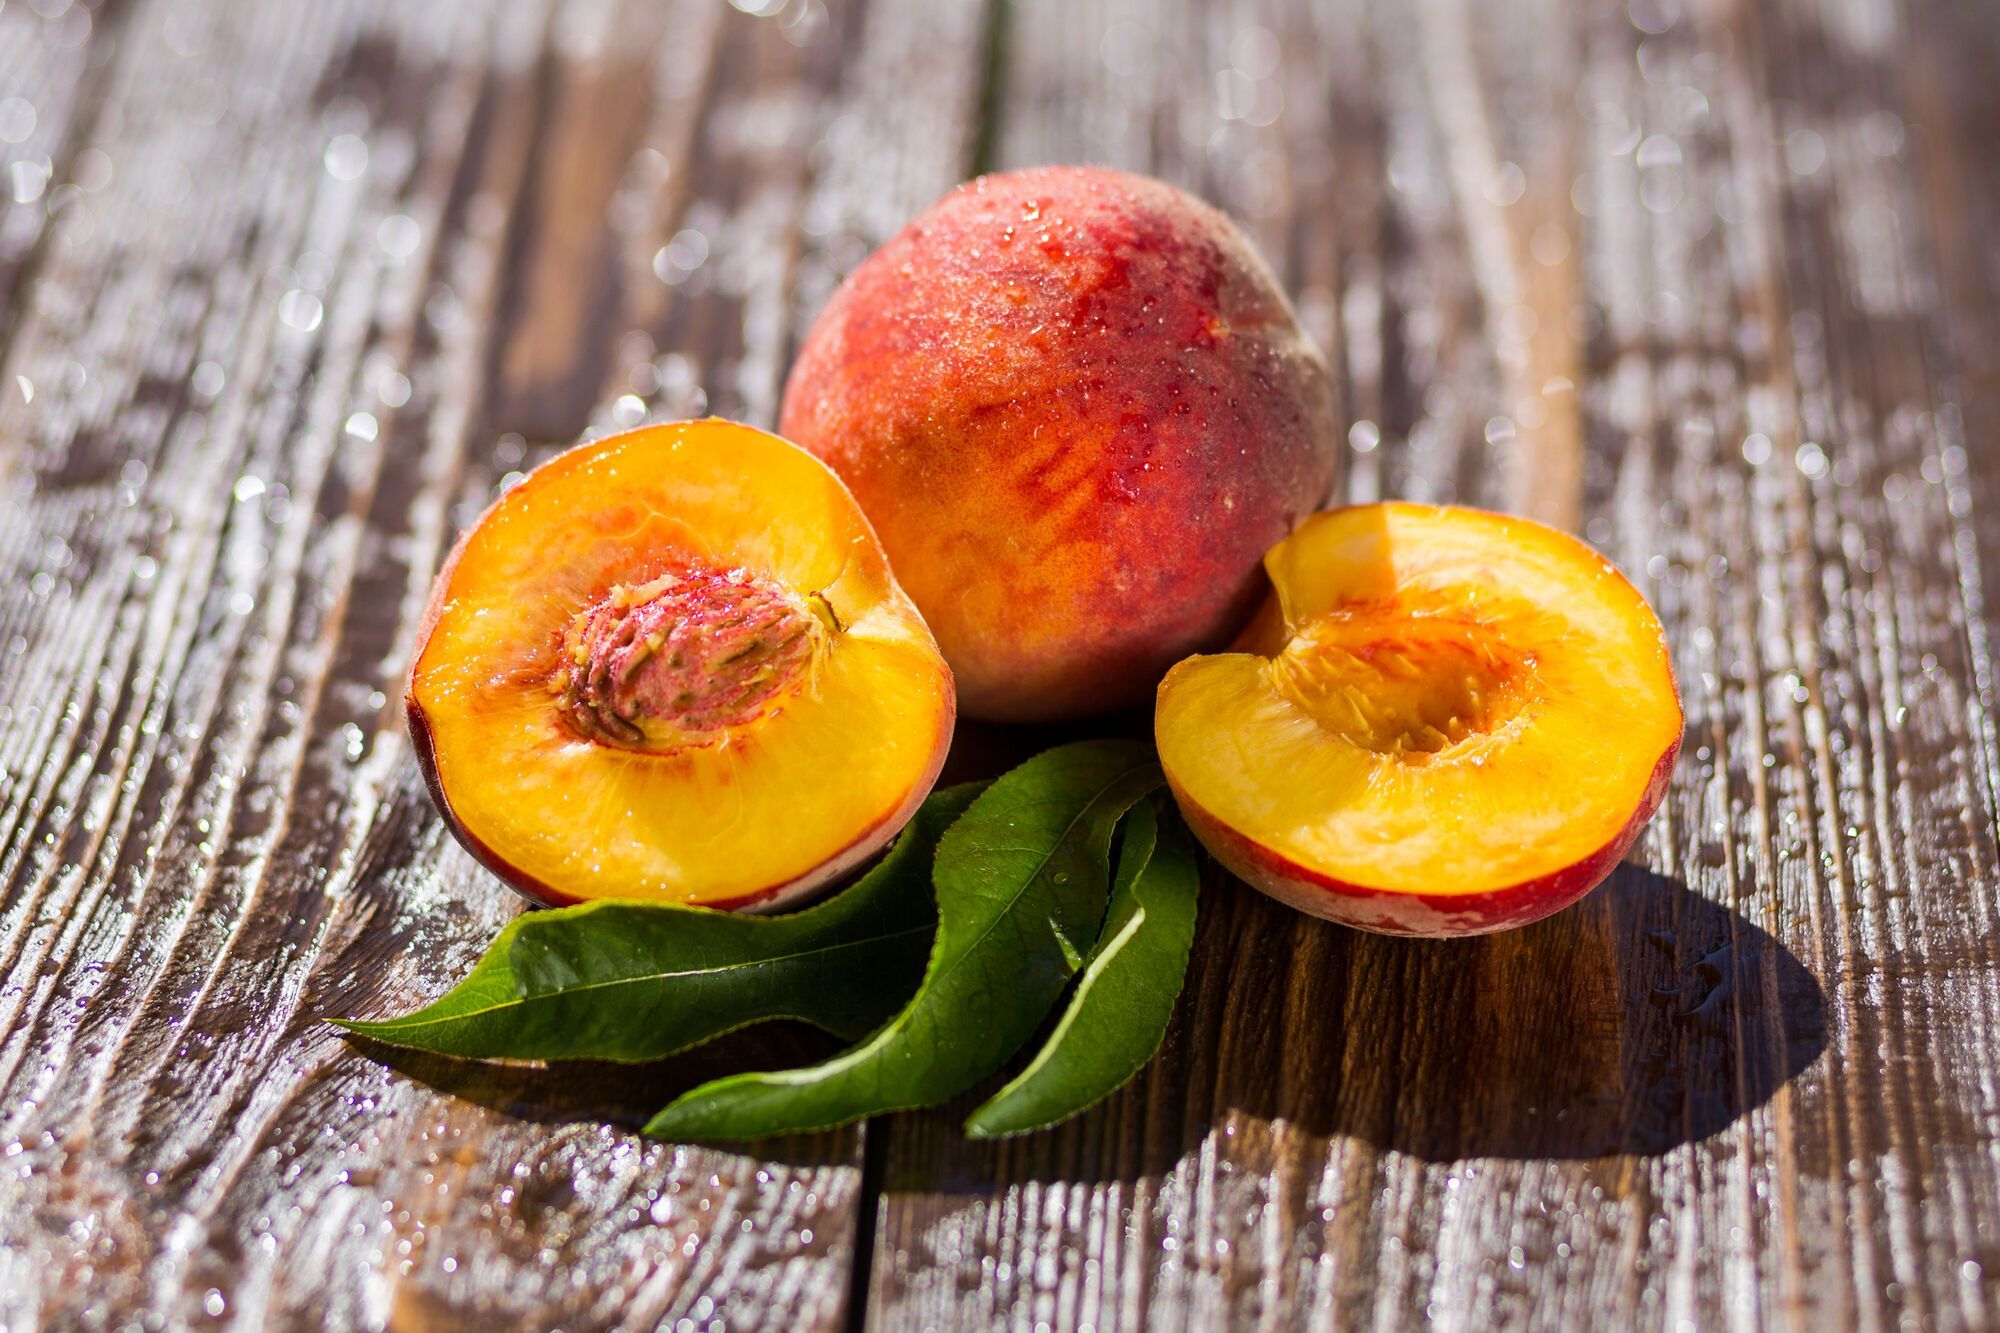 Not only tasty, but also healthy: 10 amazing properties of peaches revealed